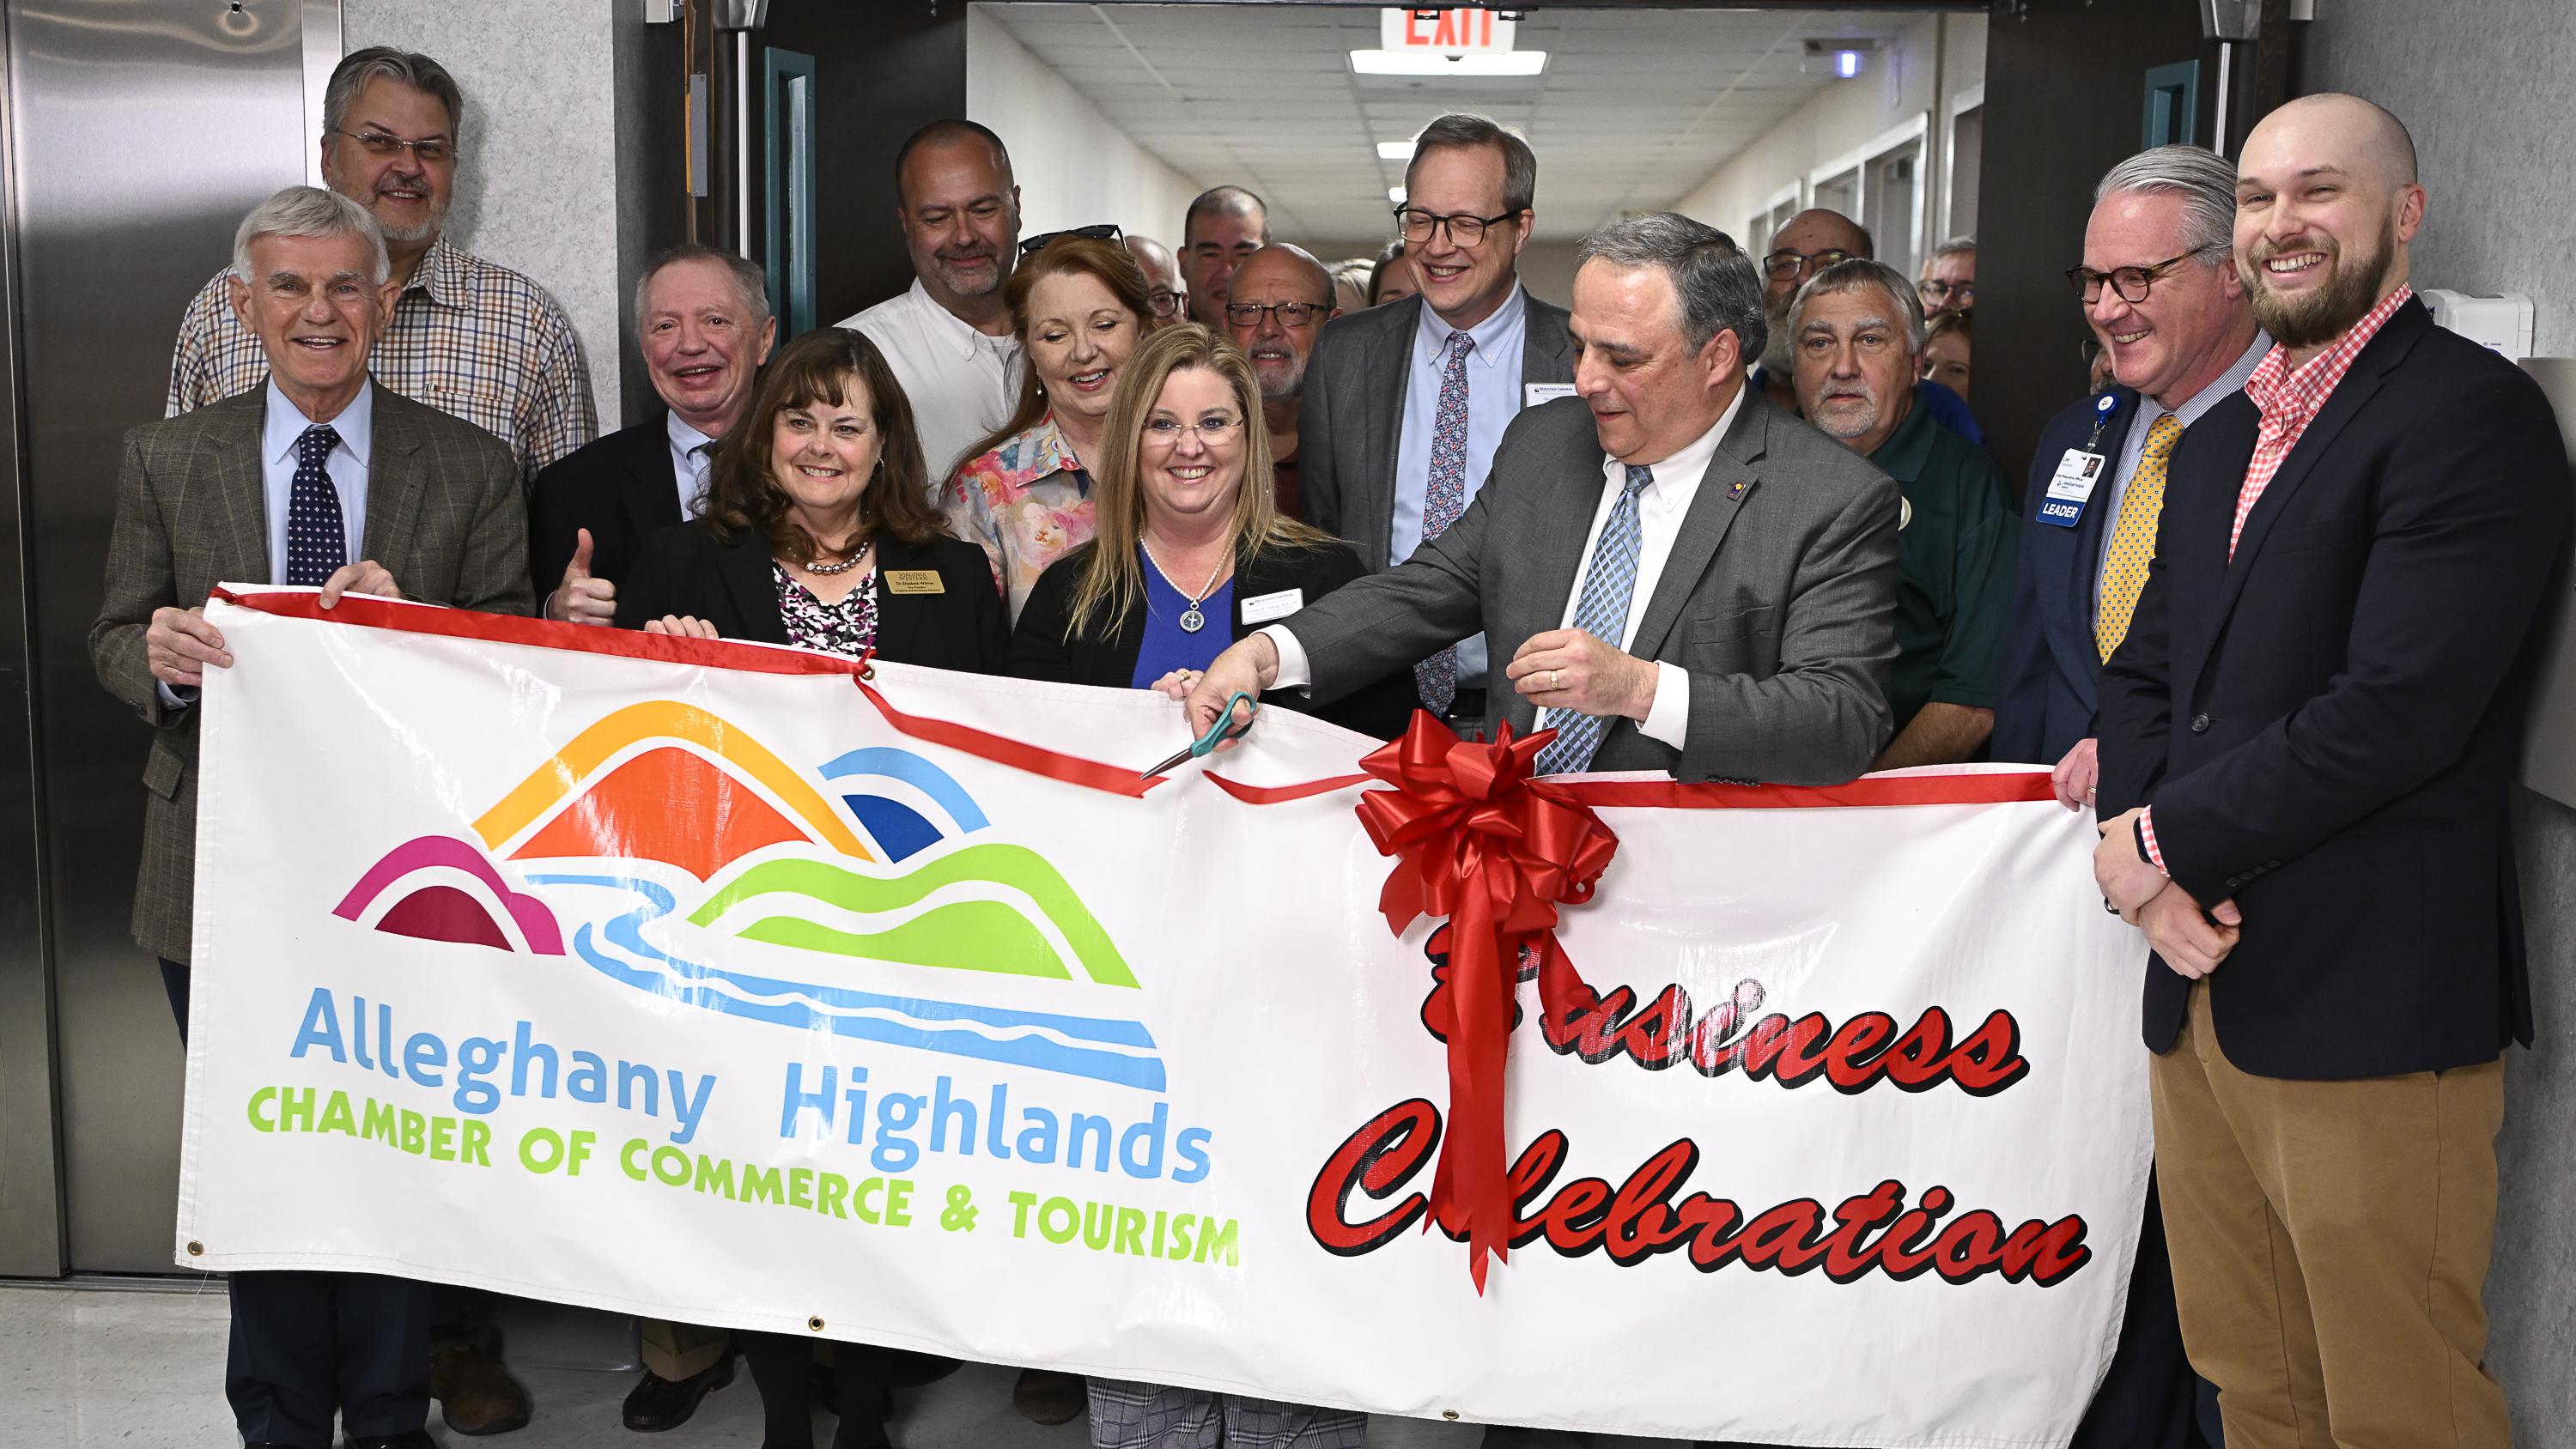 Members of the Alleghany Highlands community gather at LewisGale Hospital Alleghany for a ribbon cutting ceremony to celebrate the new Medical Laboratory Technology program.